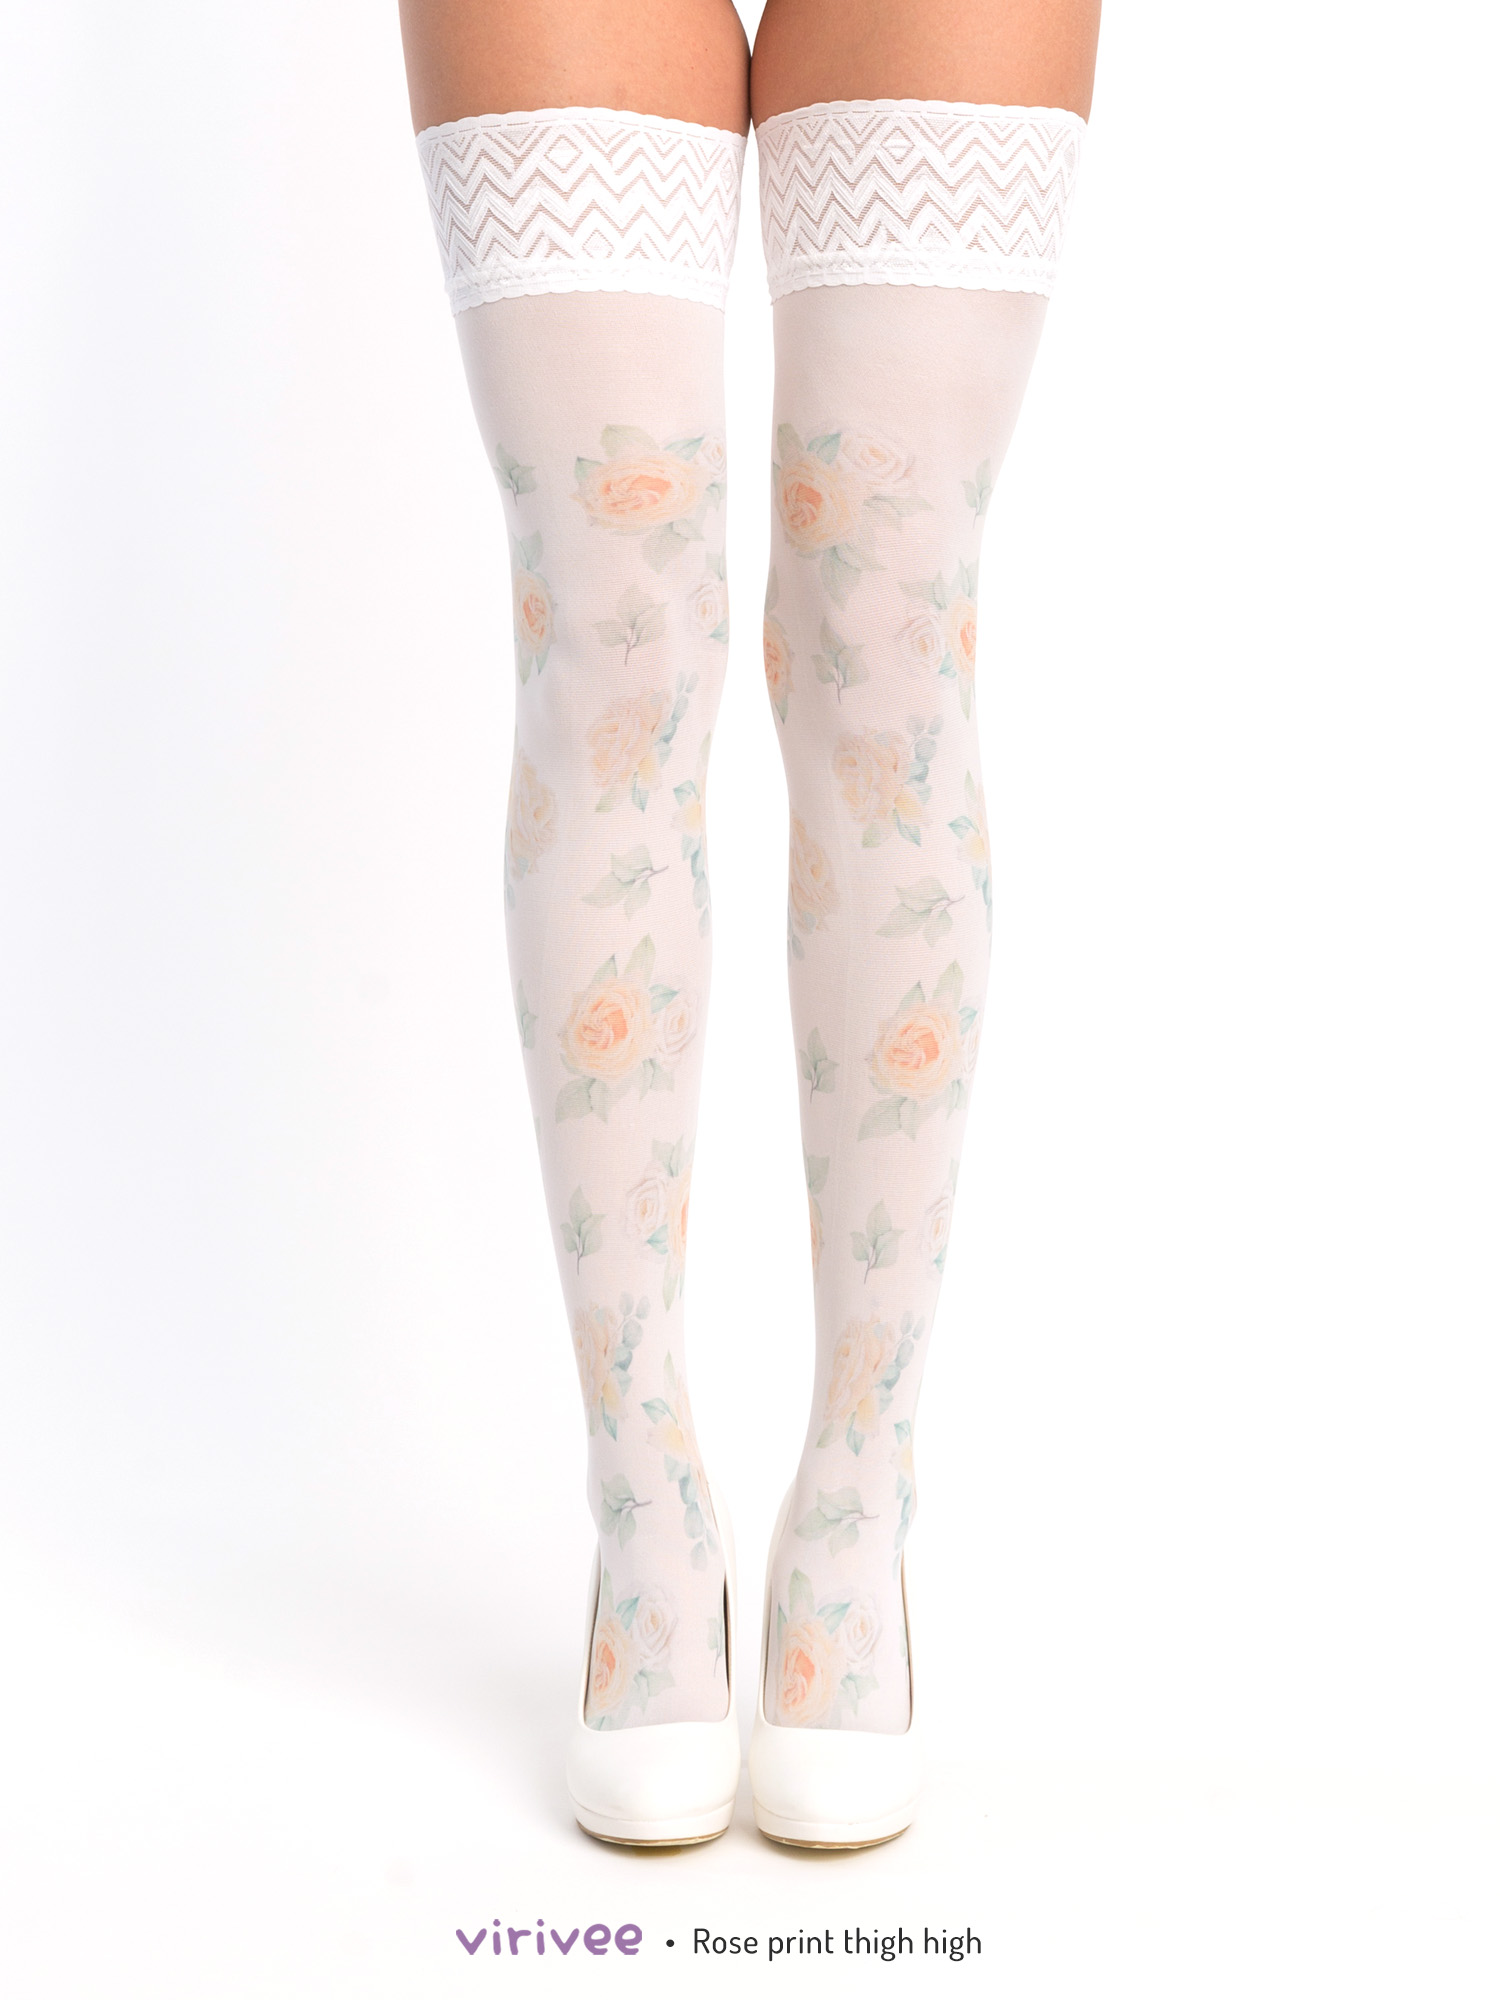 Yellow rose print thigh high stay-up